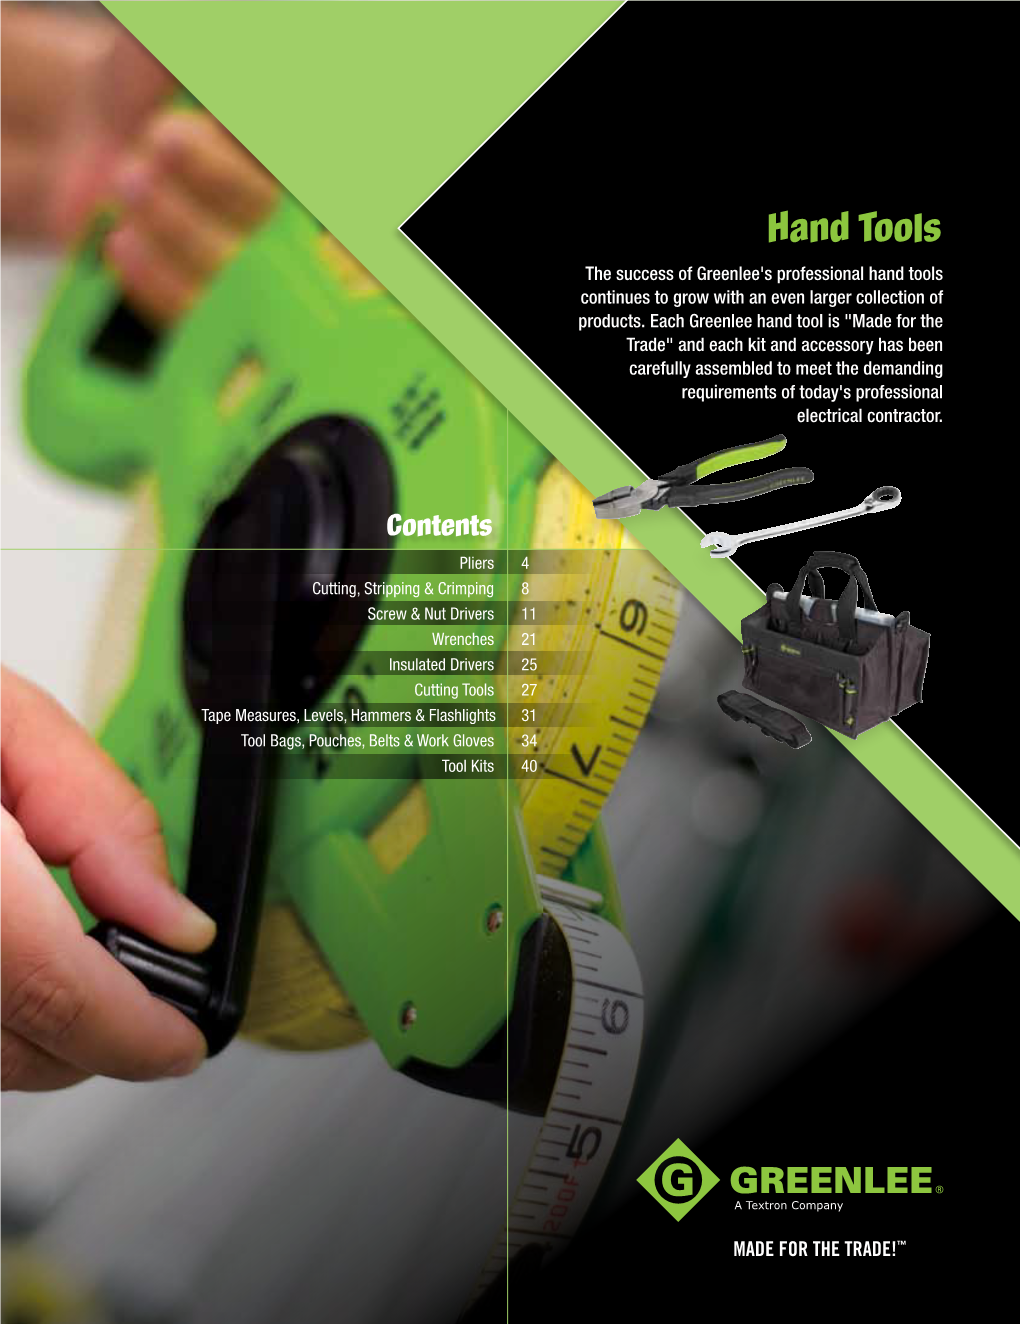 Greenlee's Professional Hand Tools Continues to Grow with an Even Larger Collection of Products